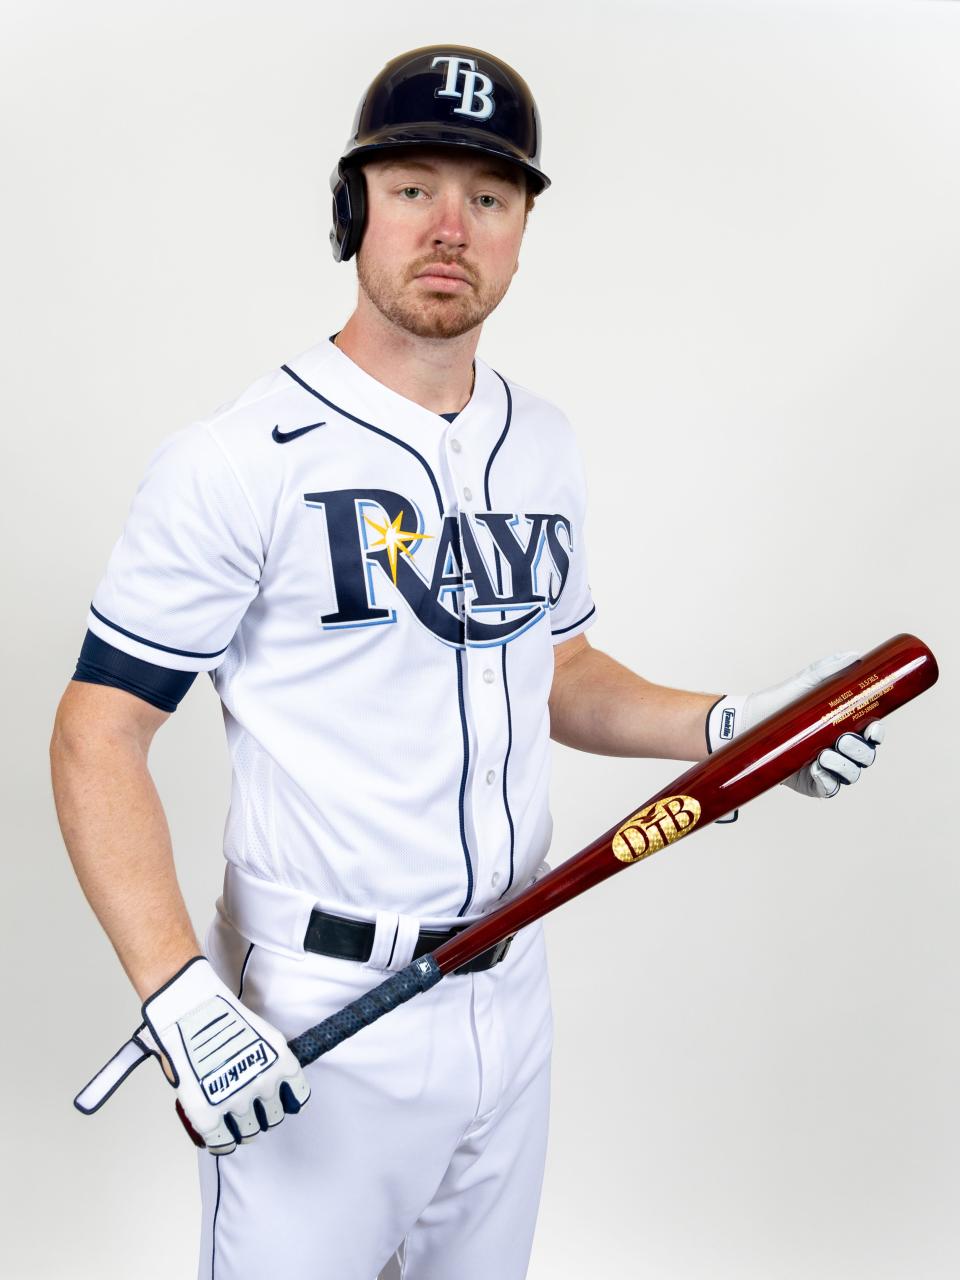 Tampa Bay Rays outfielder Grant Witherspoon (75) during media day at ESPN Wide World of Sports Stadium on Feb. 19, 2023.